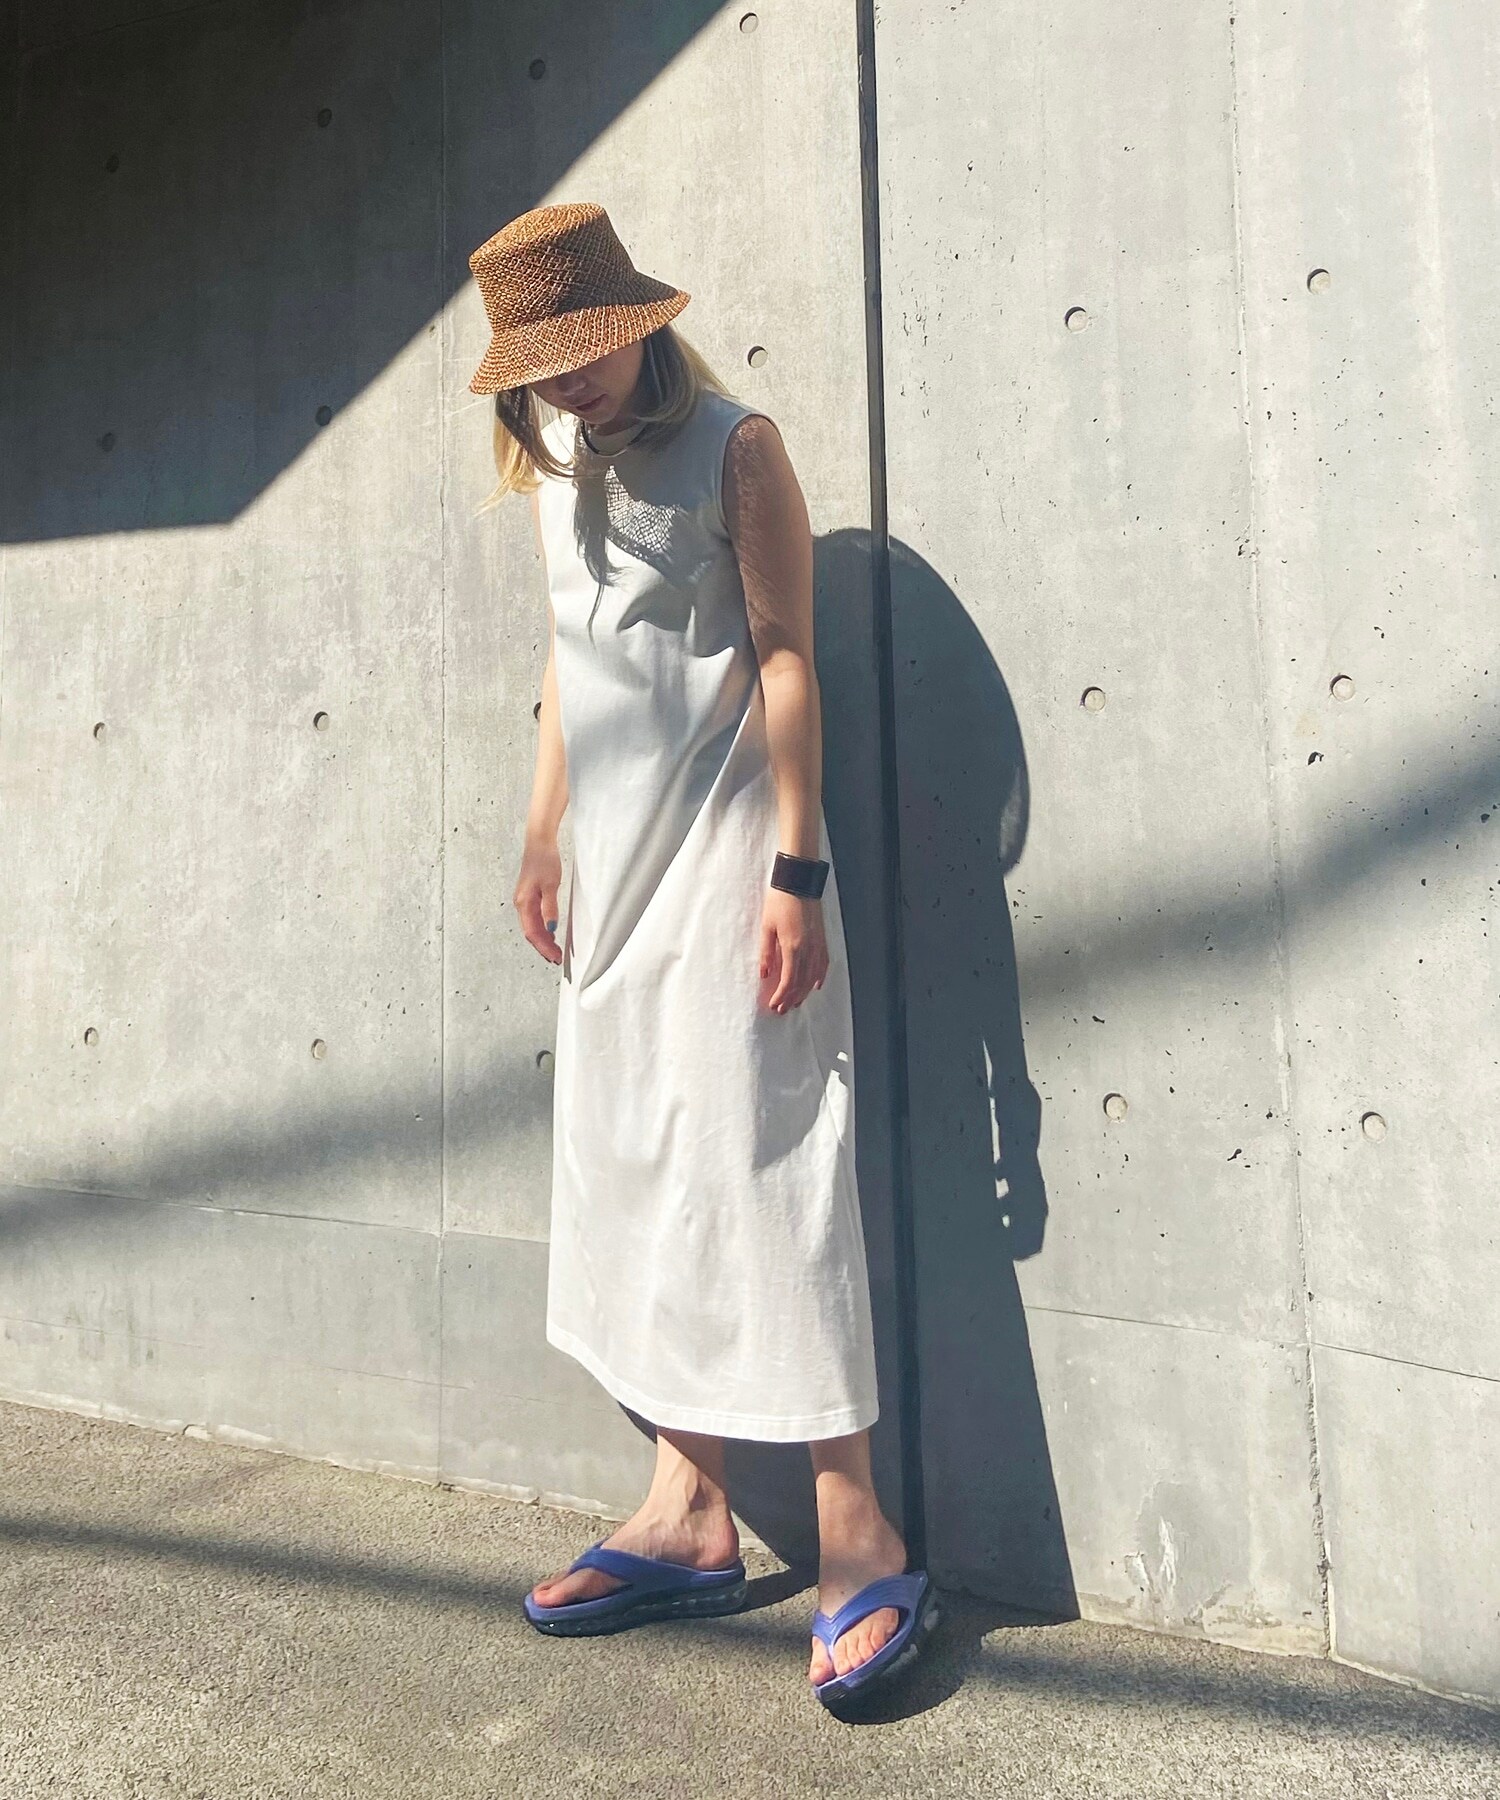 【UNISEX】AIR SOLE ギョサン